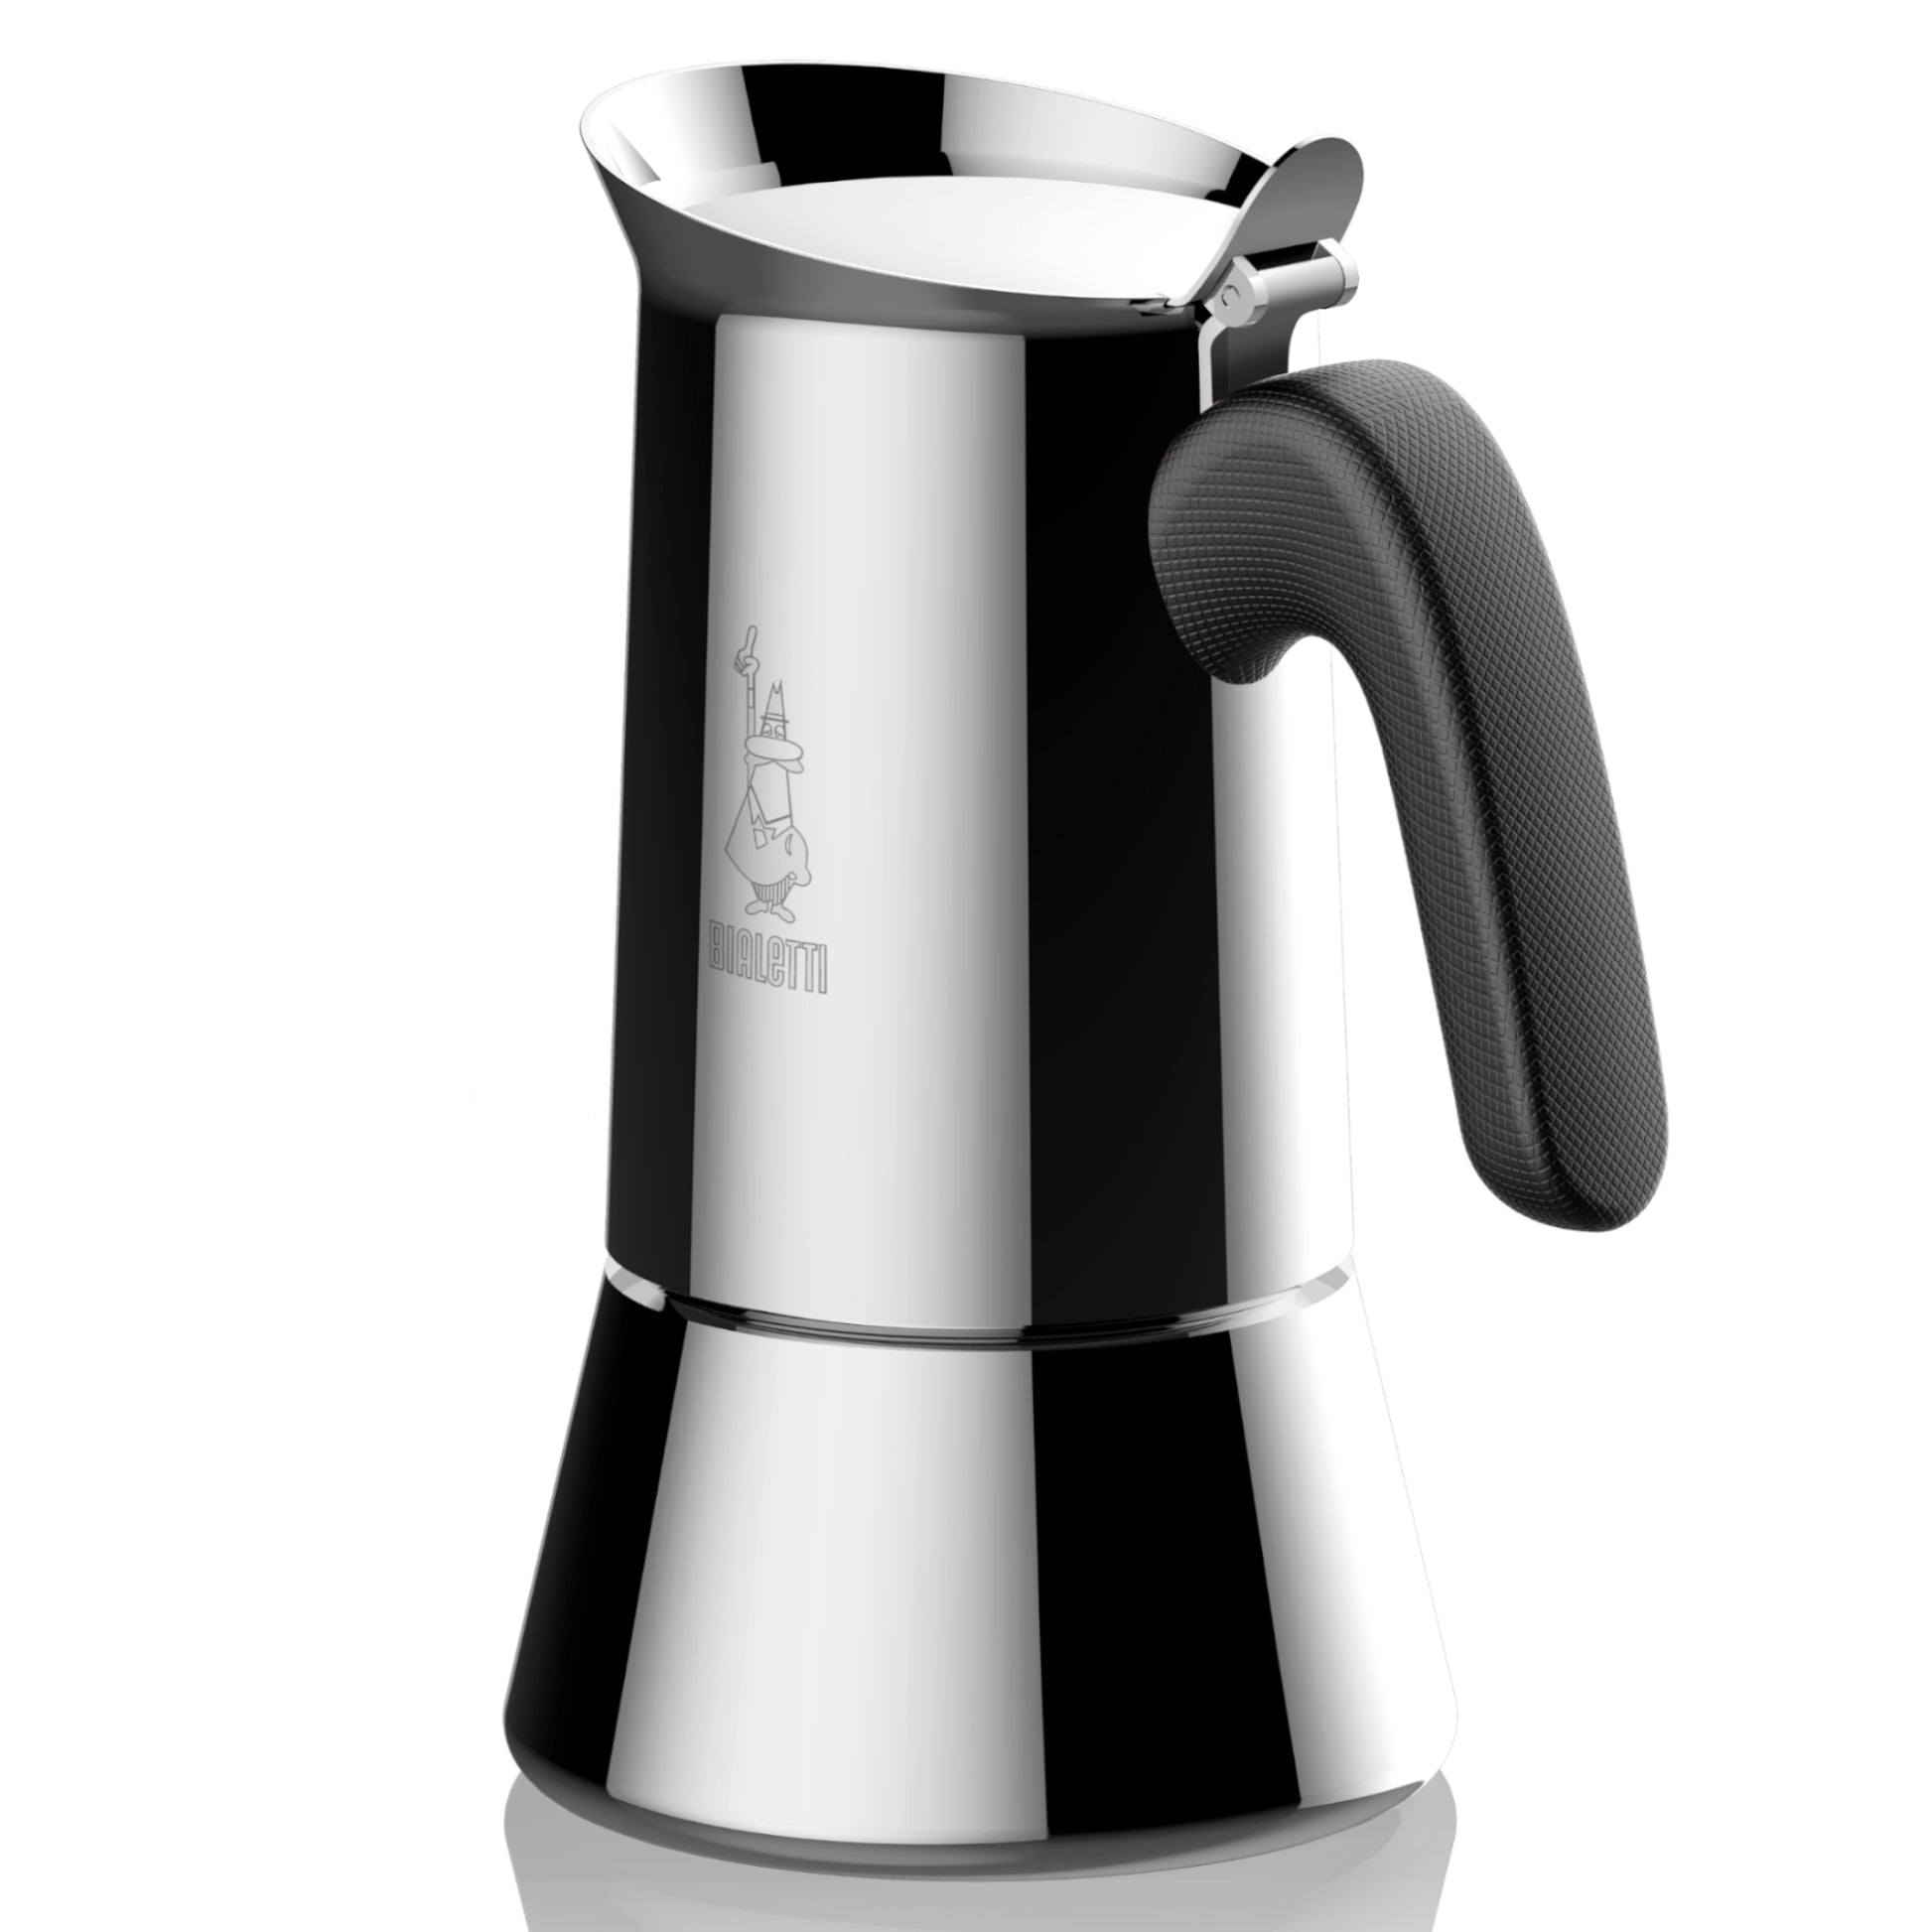 Bialetti Venus 4-cup: Hardly any coffee extracted from boiler!